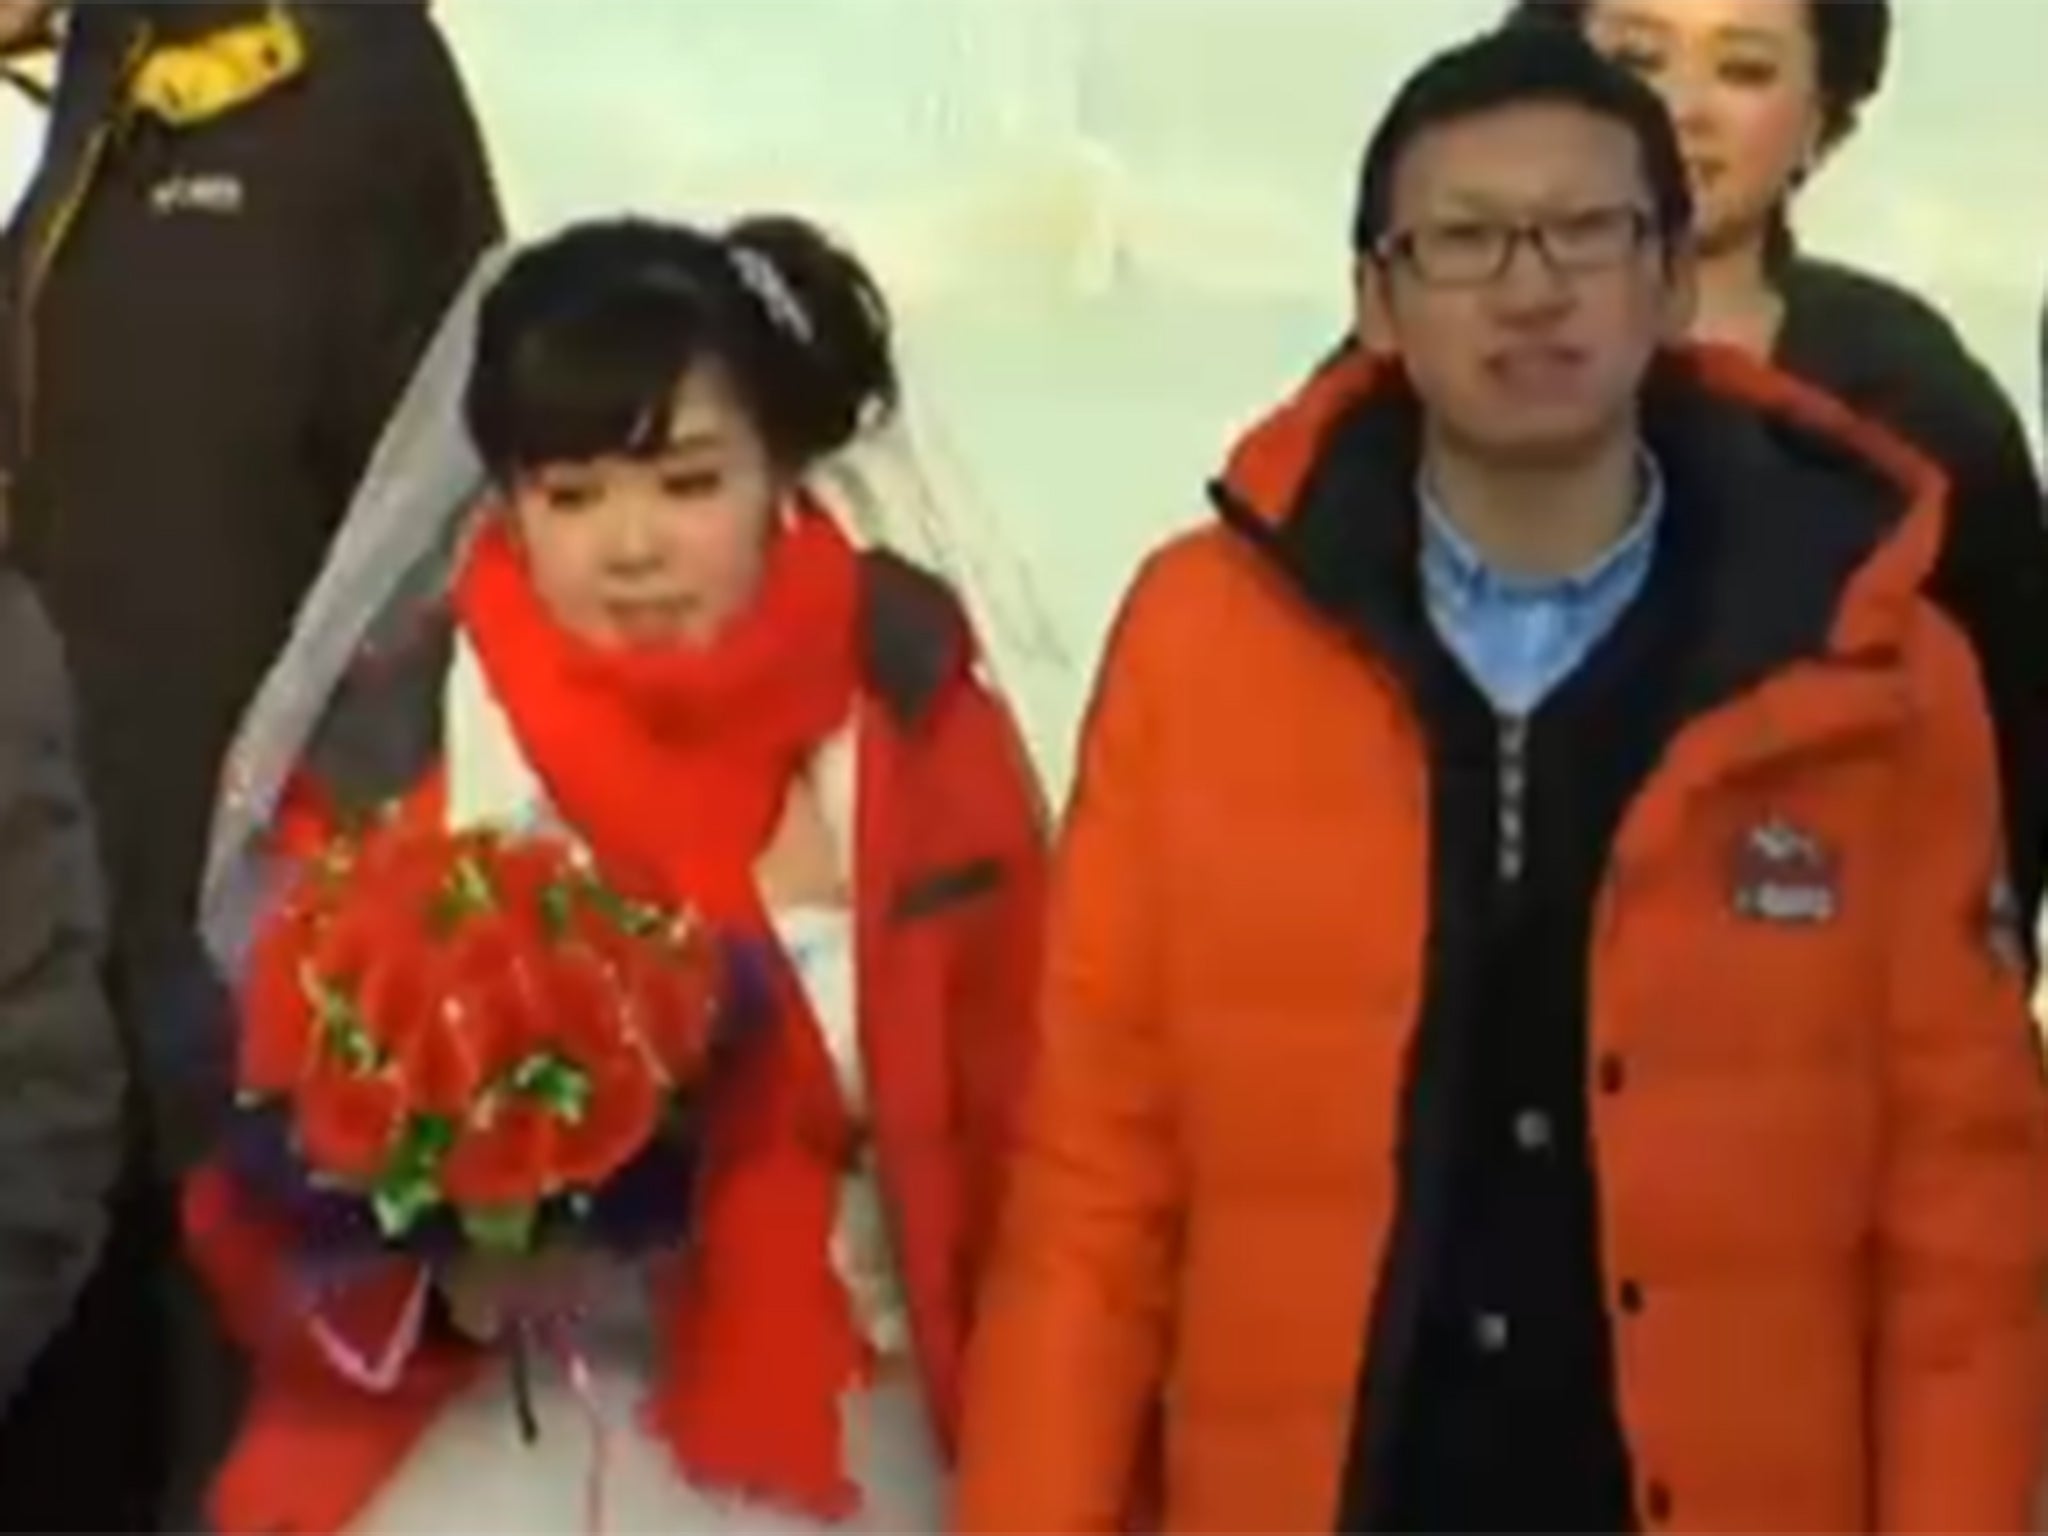 It's a little bit nippy: One of 11 couples tying the knot at the Harbin Ice Festival